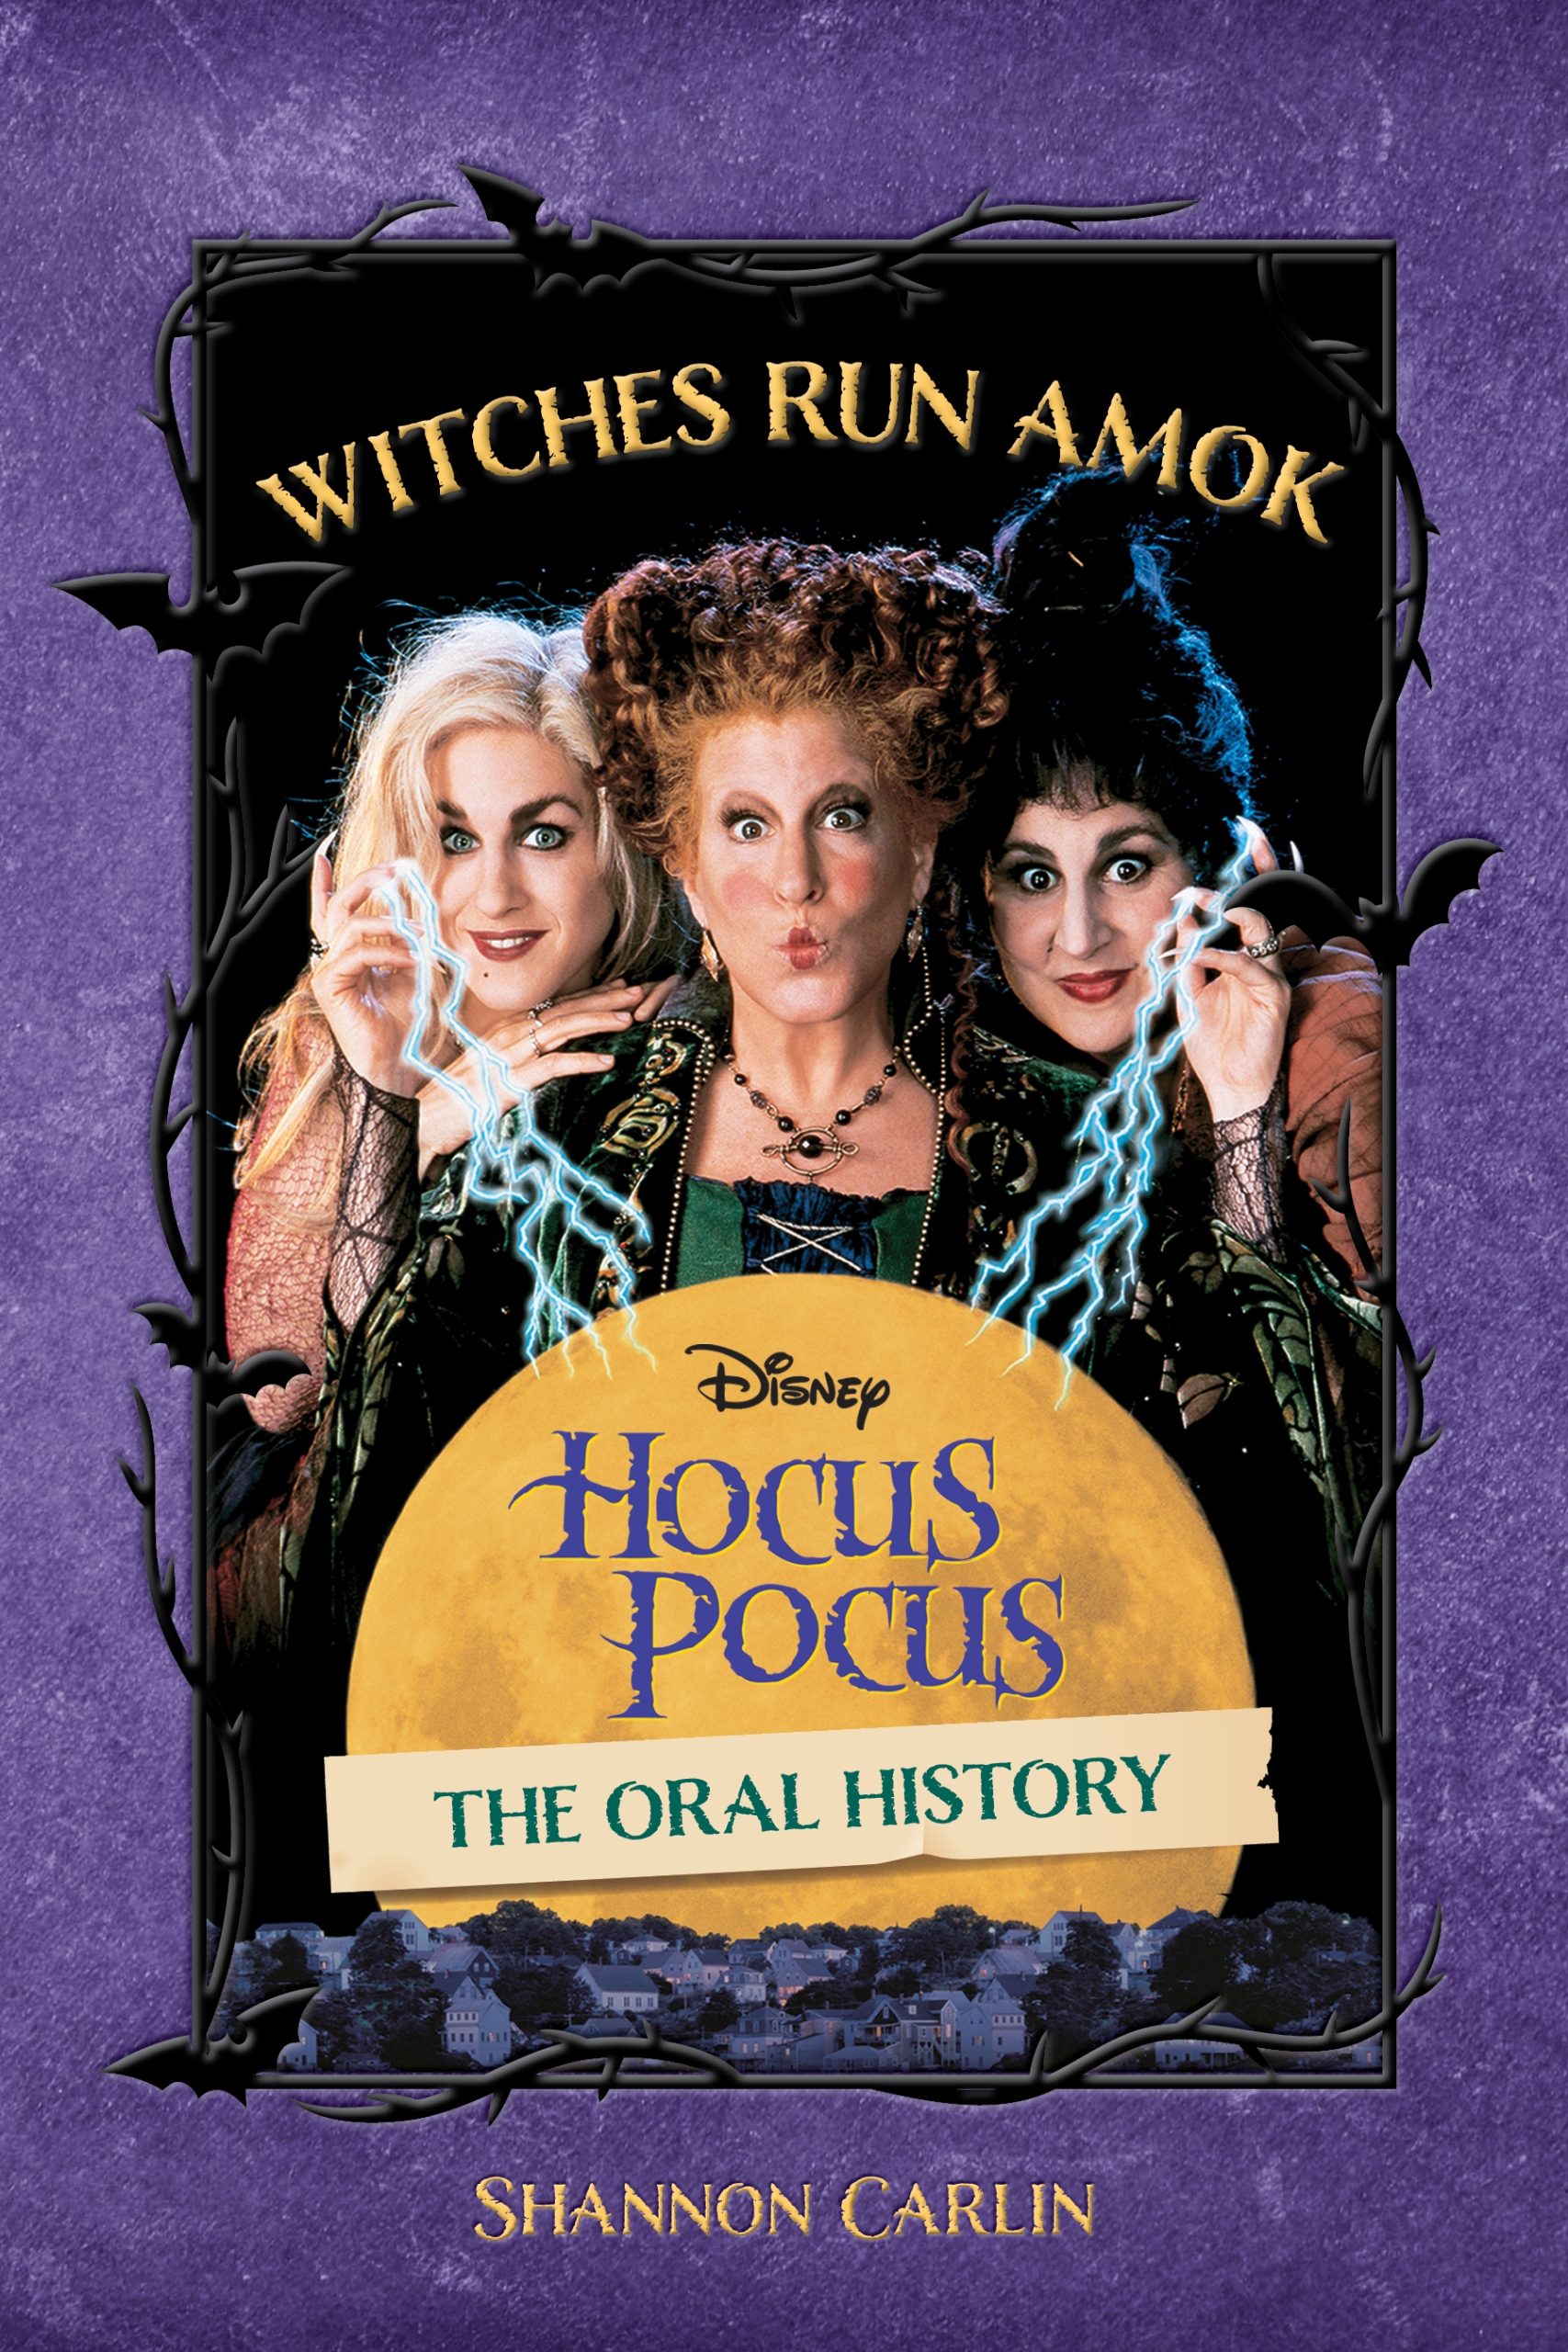 Cover reading "Witches Run Amok, The Oral History of Disney's Hocus Pocus by Shannon Carlin." Three women are dressed comically as witches.